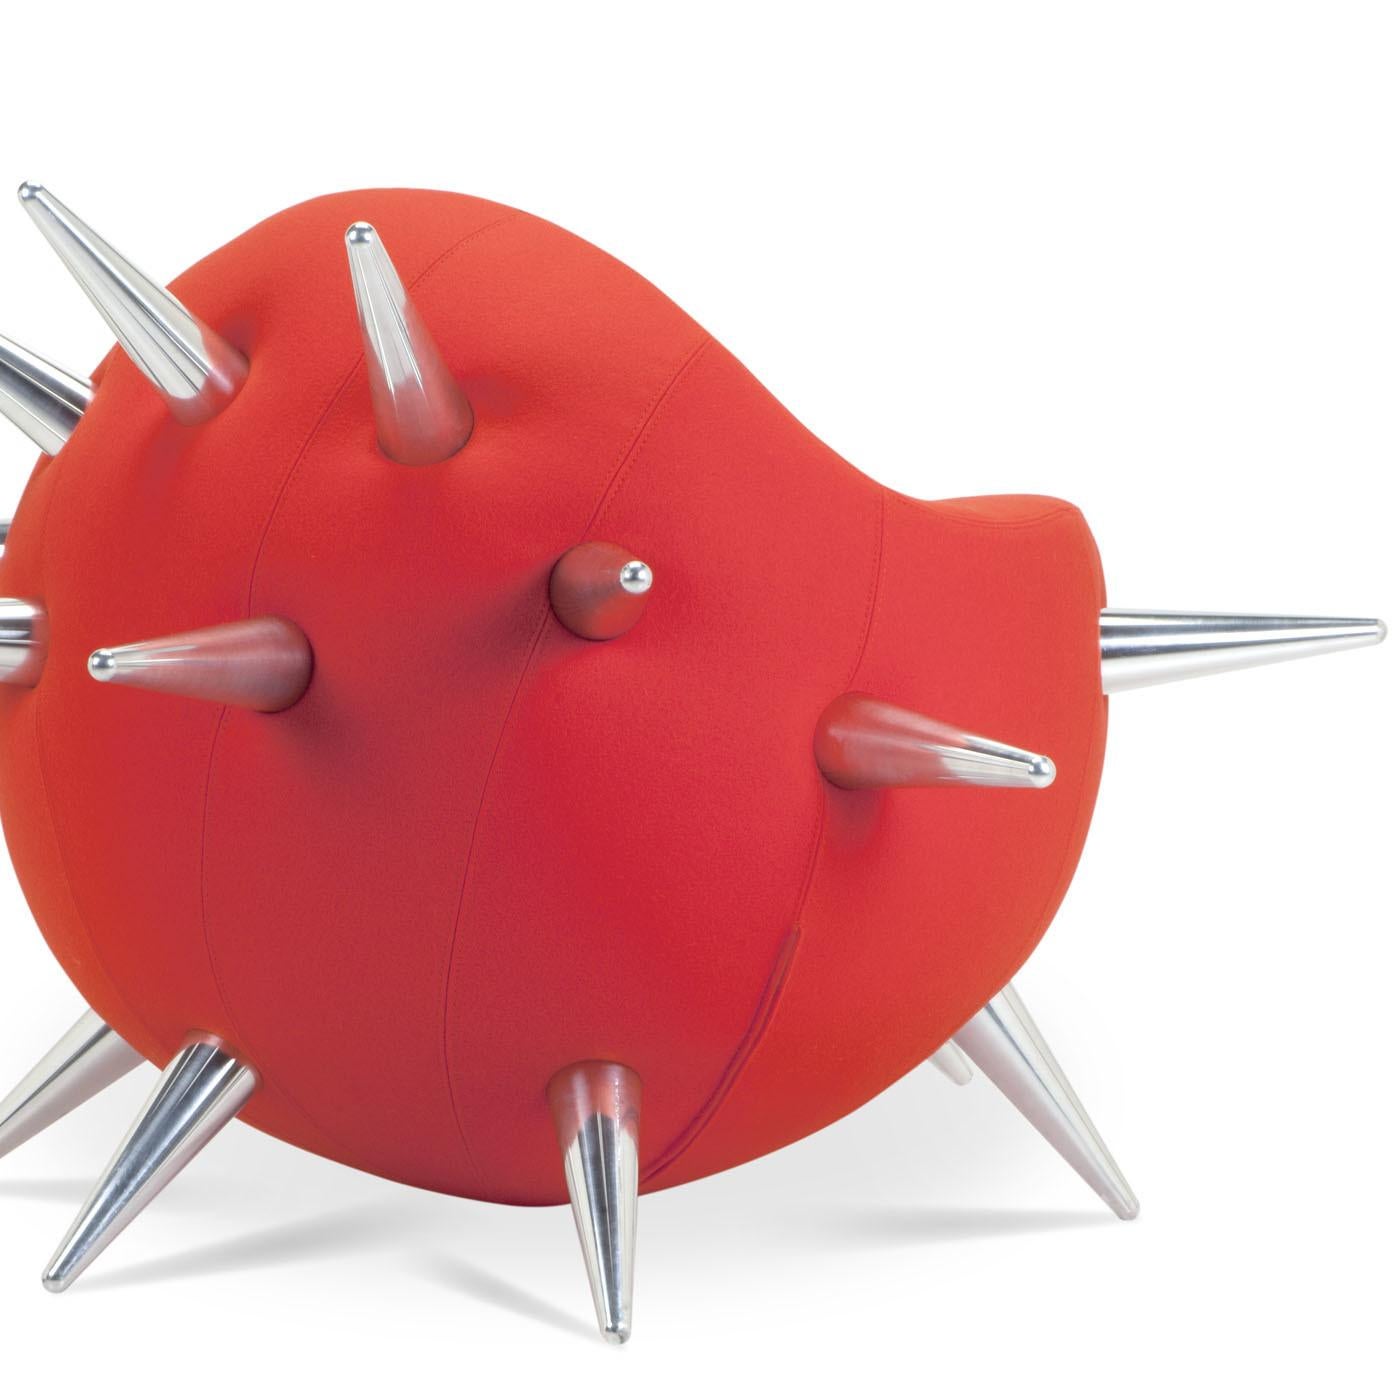 Bomb's iconic design is inspired by an object of destruction to make us reflect on the drama of war and to stir up thoughts about peace and life. Featuring a round shape and five aluminum tips, Bomb armchair is shown here in red, but it is also